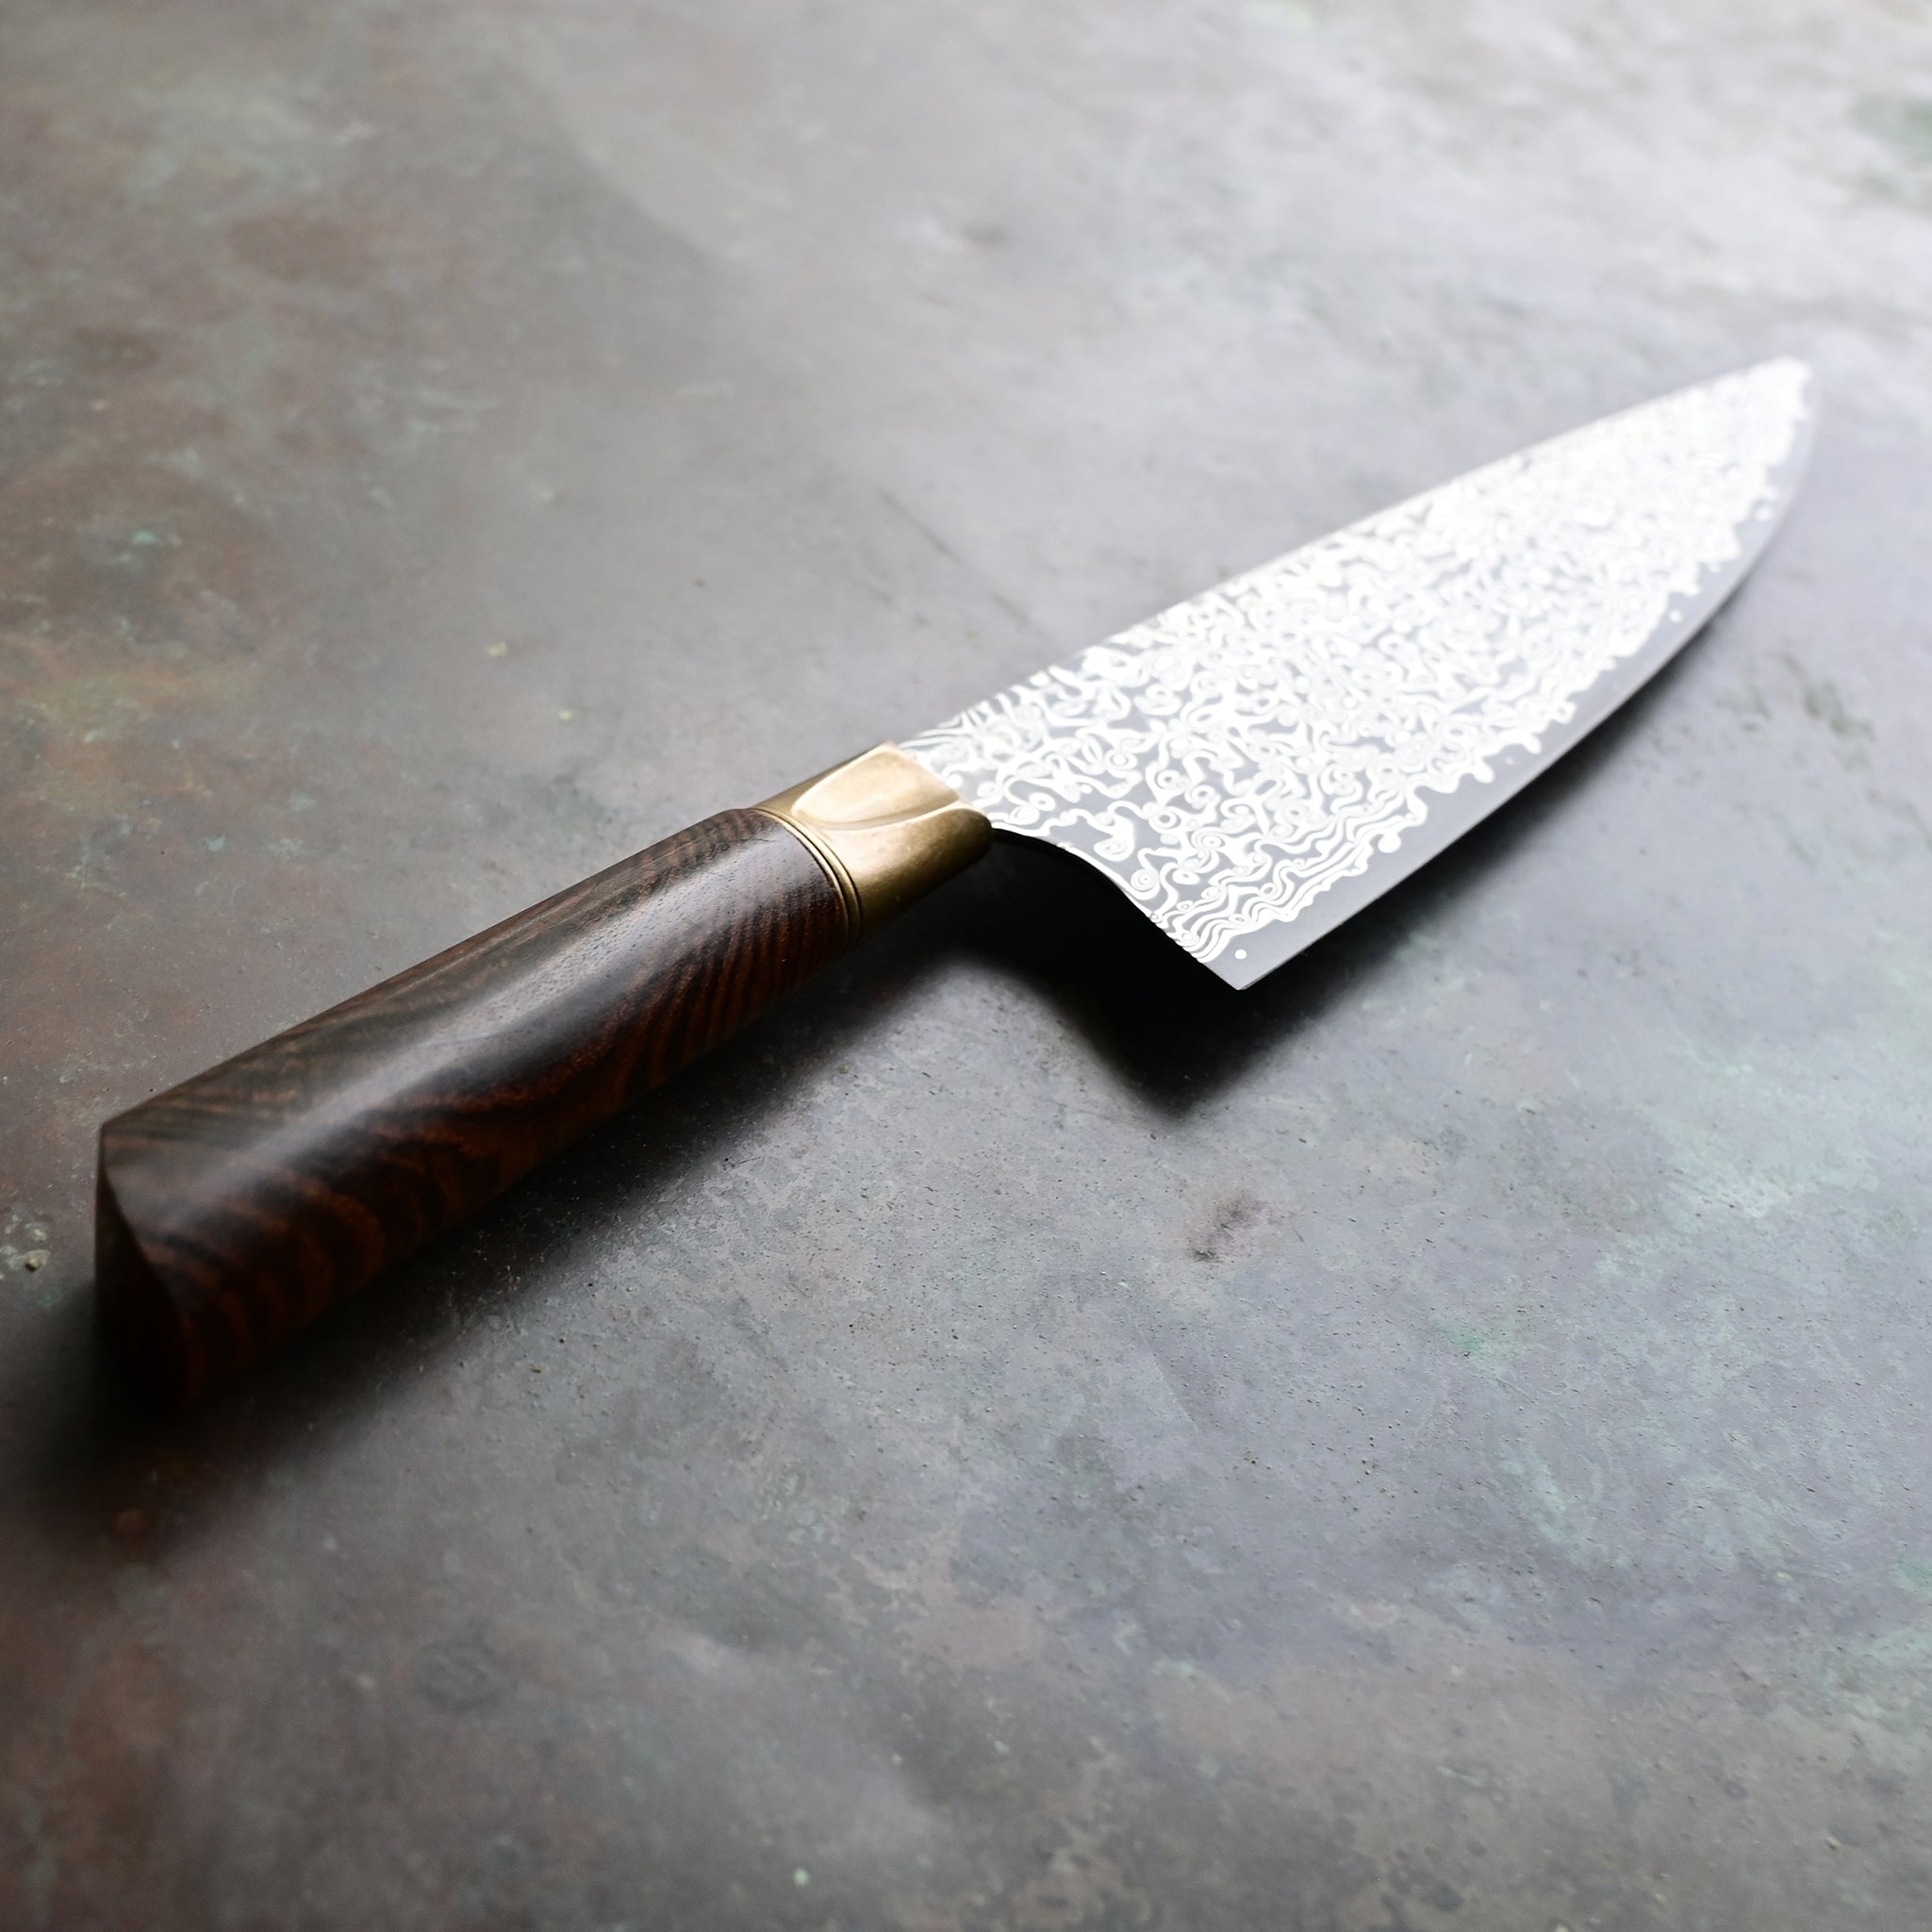 A Santoku knife with a starfall Damascus pattern, natural bronze bolster, and stabilized golden Buckeye burl handle, on a concrete backdrop